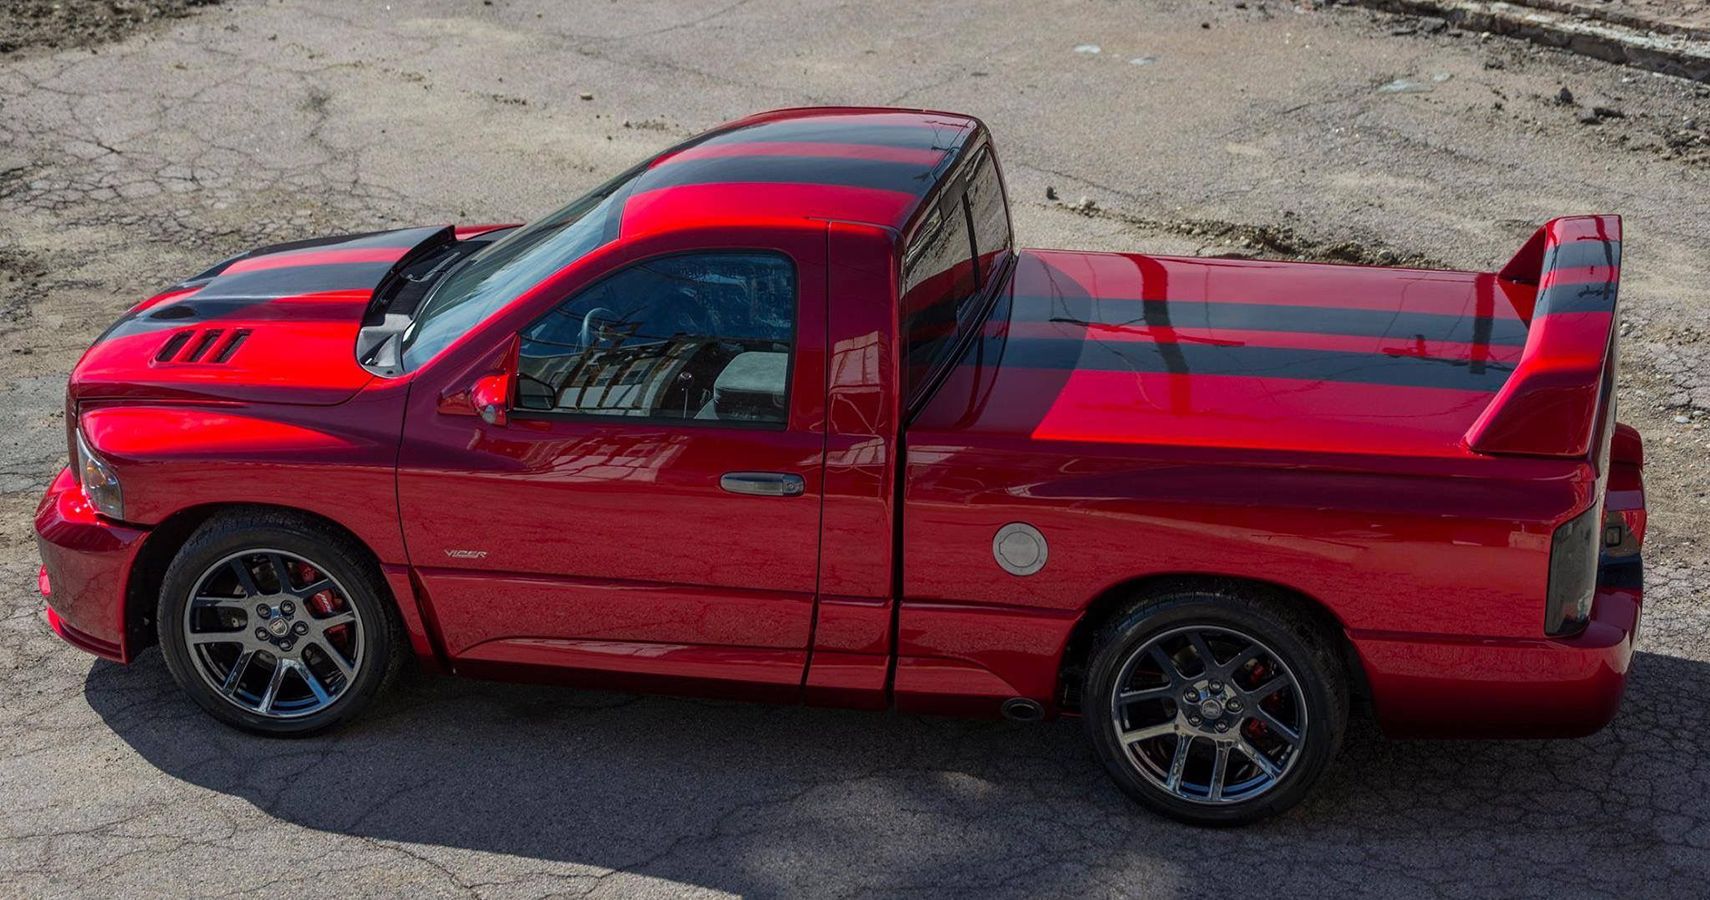 A Ram Pickup With A Rear Wing?